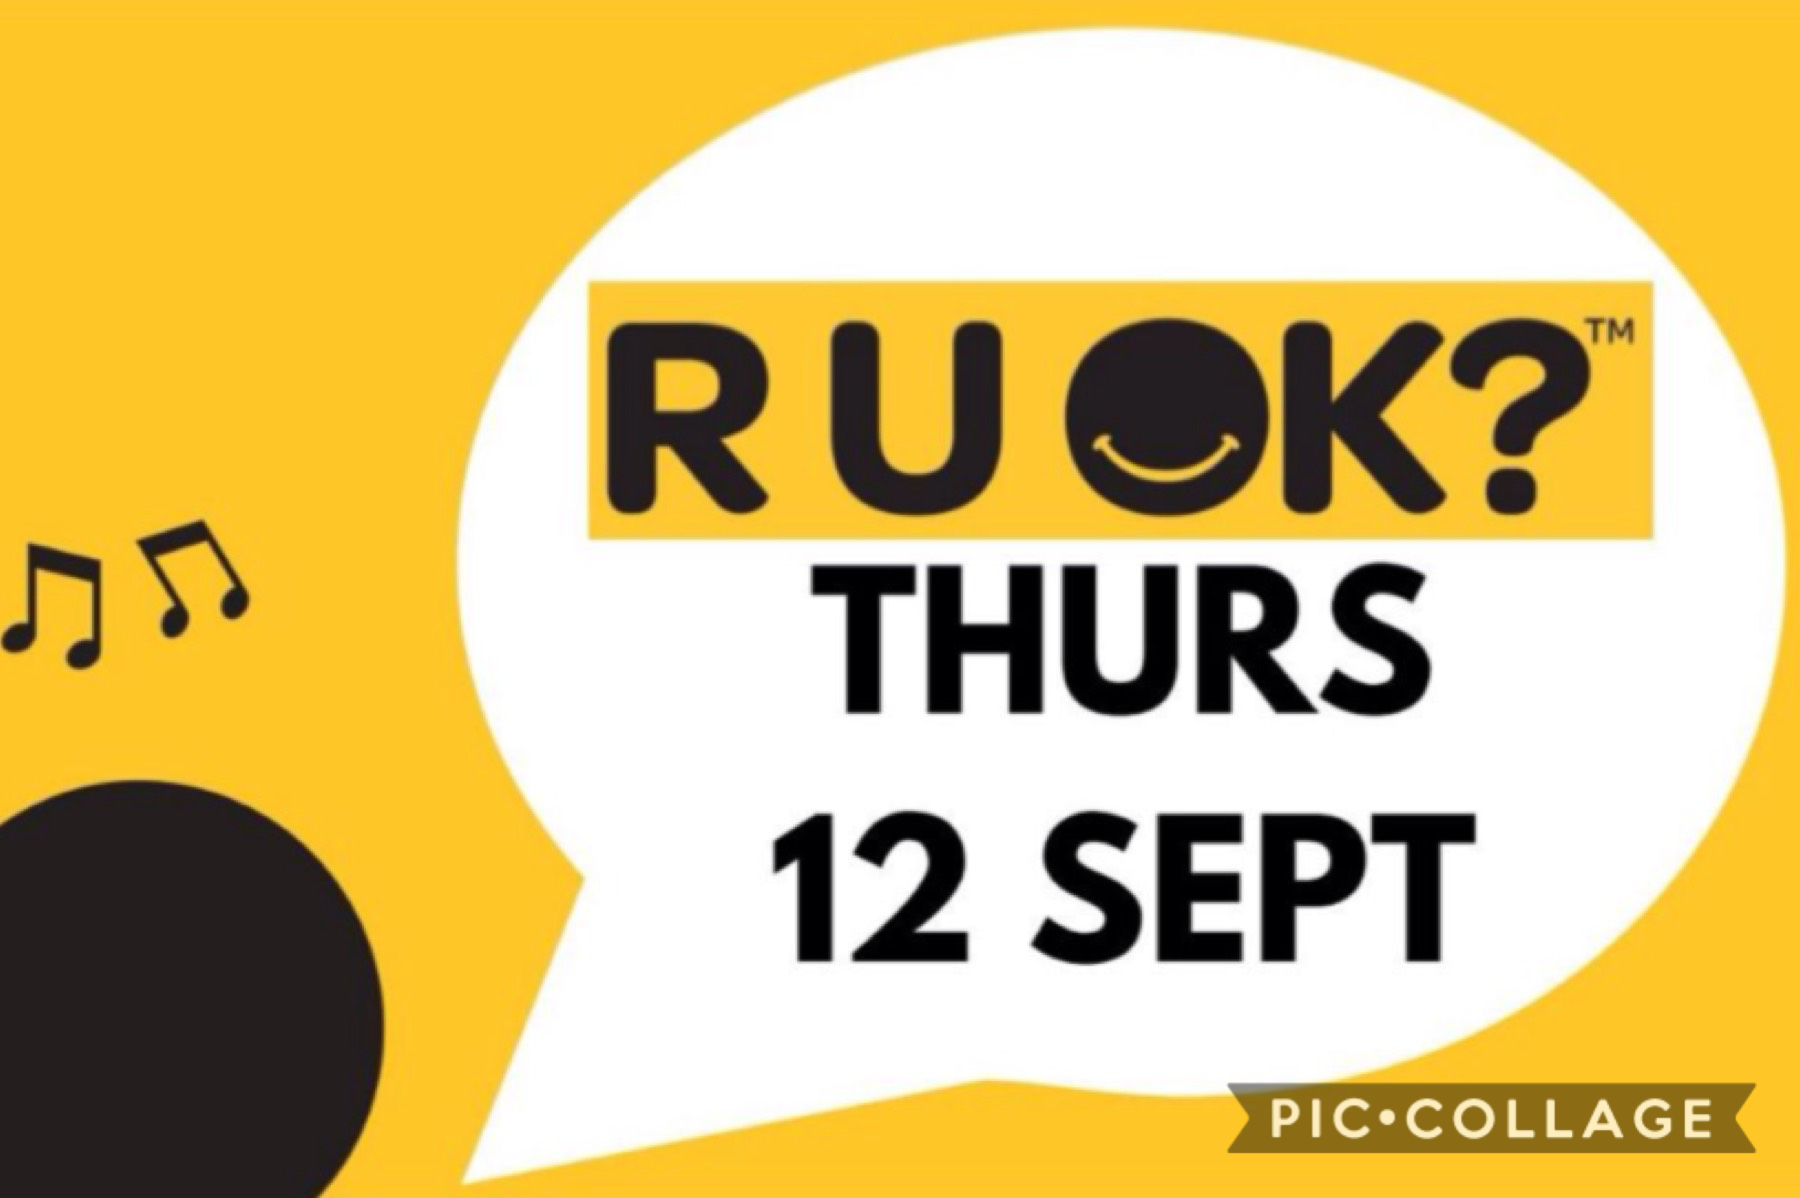 https://www.ruok.org.au
please check out the link! this is a great cause to speak awareness and follow these simple tips:
1.	Ask R U OK?
2.	Listen
3.	Encourage action
4.	Check in
Trust your gut and ask today!
(Sorry this is late! You should be asking peop